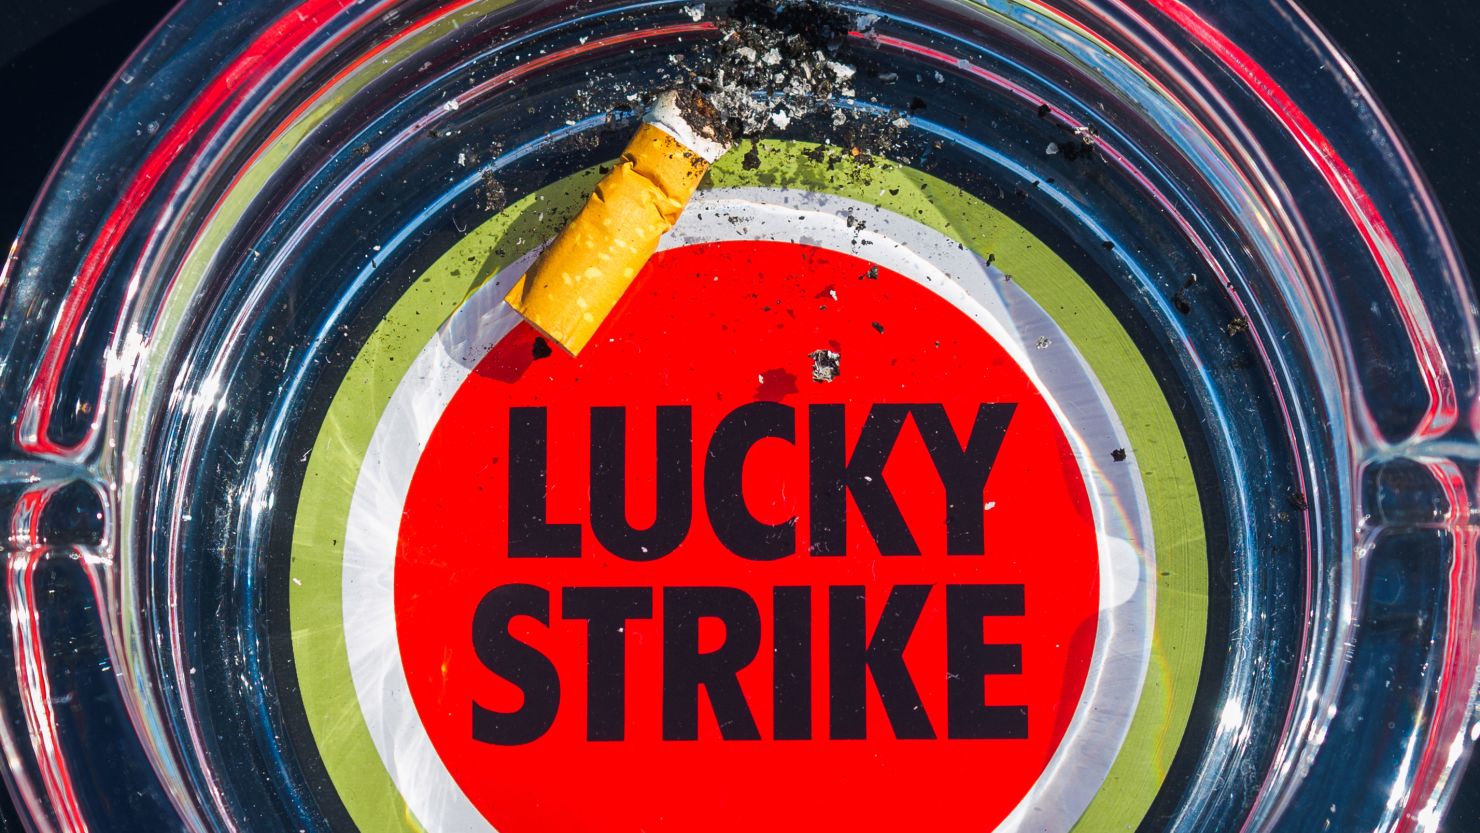 An ash tray with the Lucky Strike logo on it can be seen in Bayreuth, Germany, 24 August 2016. The tobacco company British American Tobacco (BAT) plans to cut 950 positions due to heavy sales losses at Bayreuth. Photo: NICOLAS ARMER/dpa | usage worldwide   (Photo by Nicolas Armer/picture alliance via Getty Images)